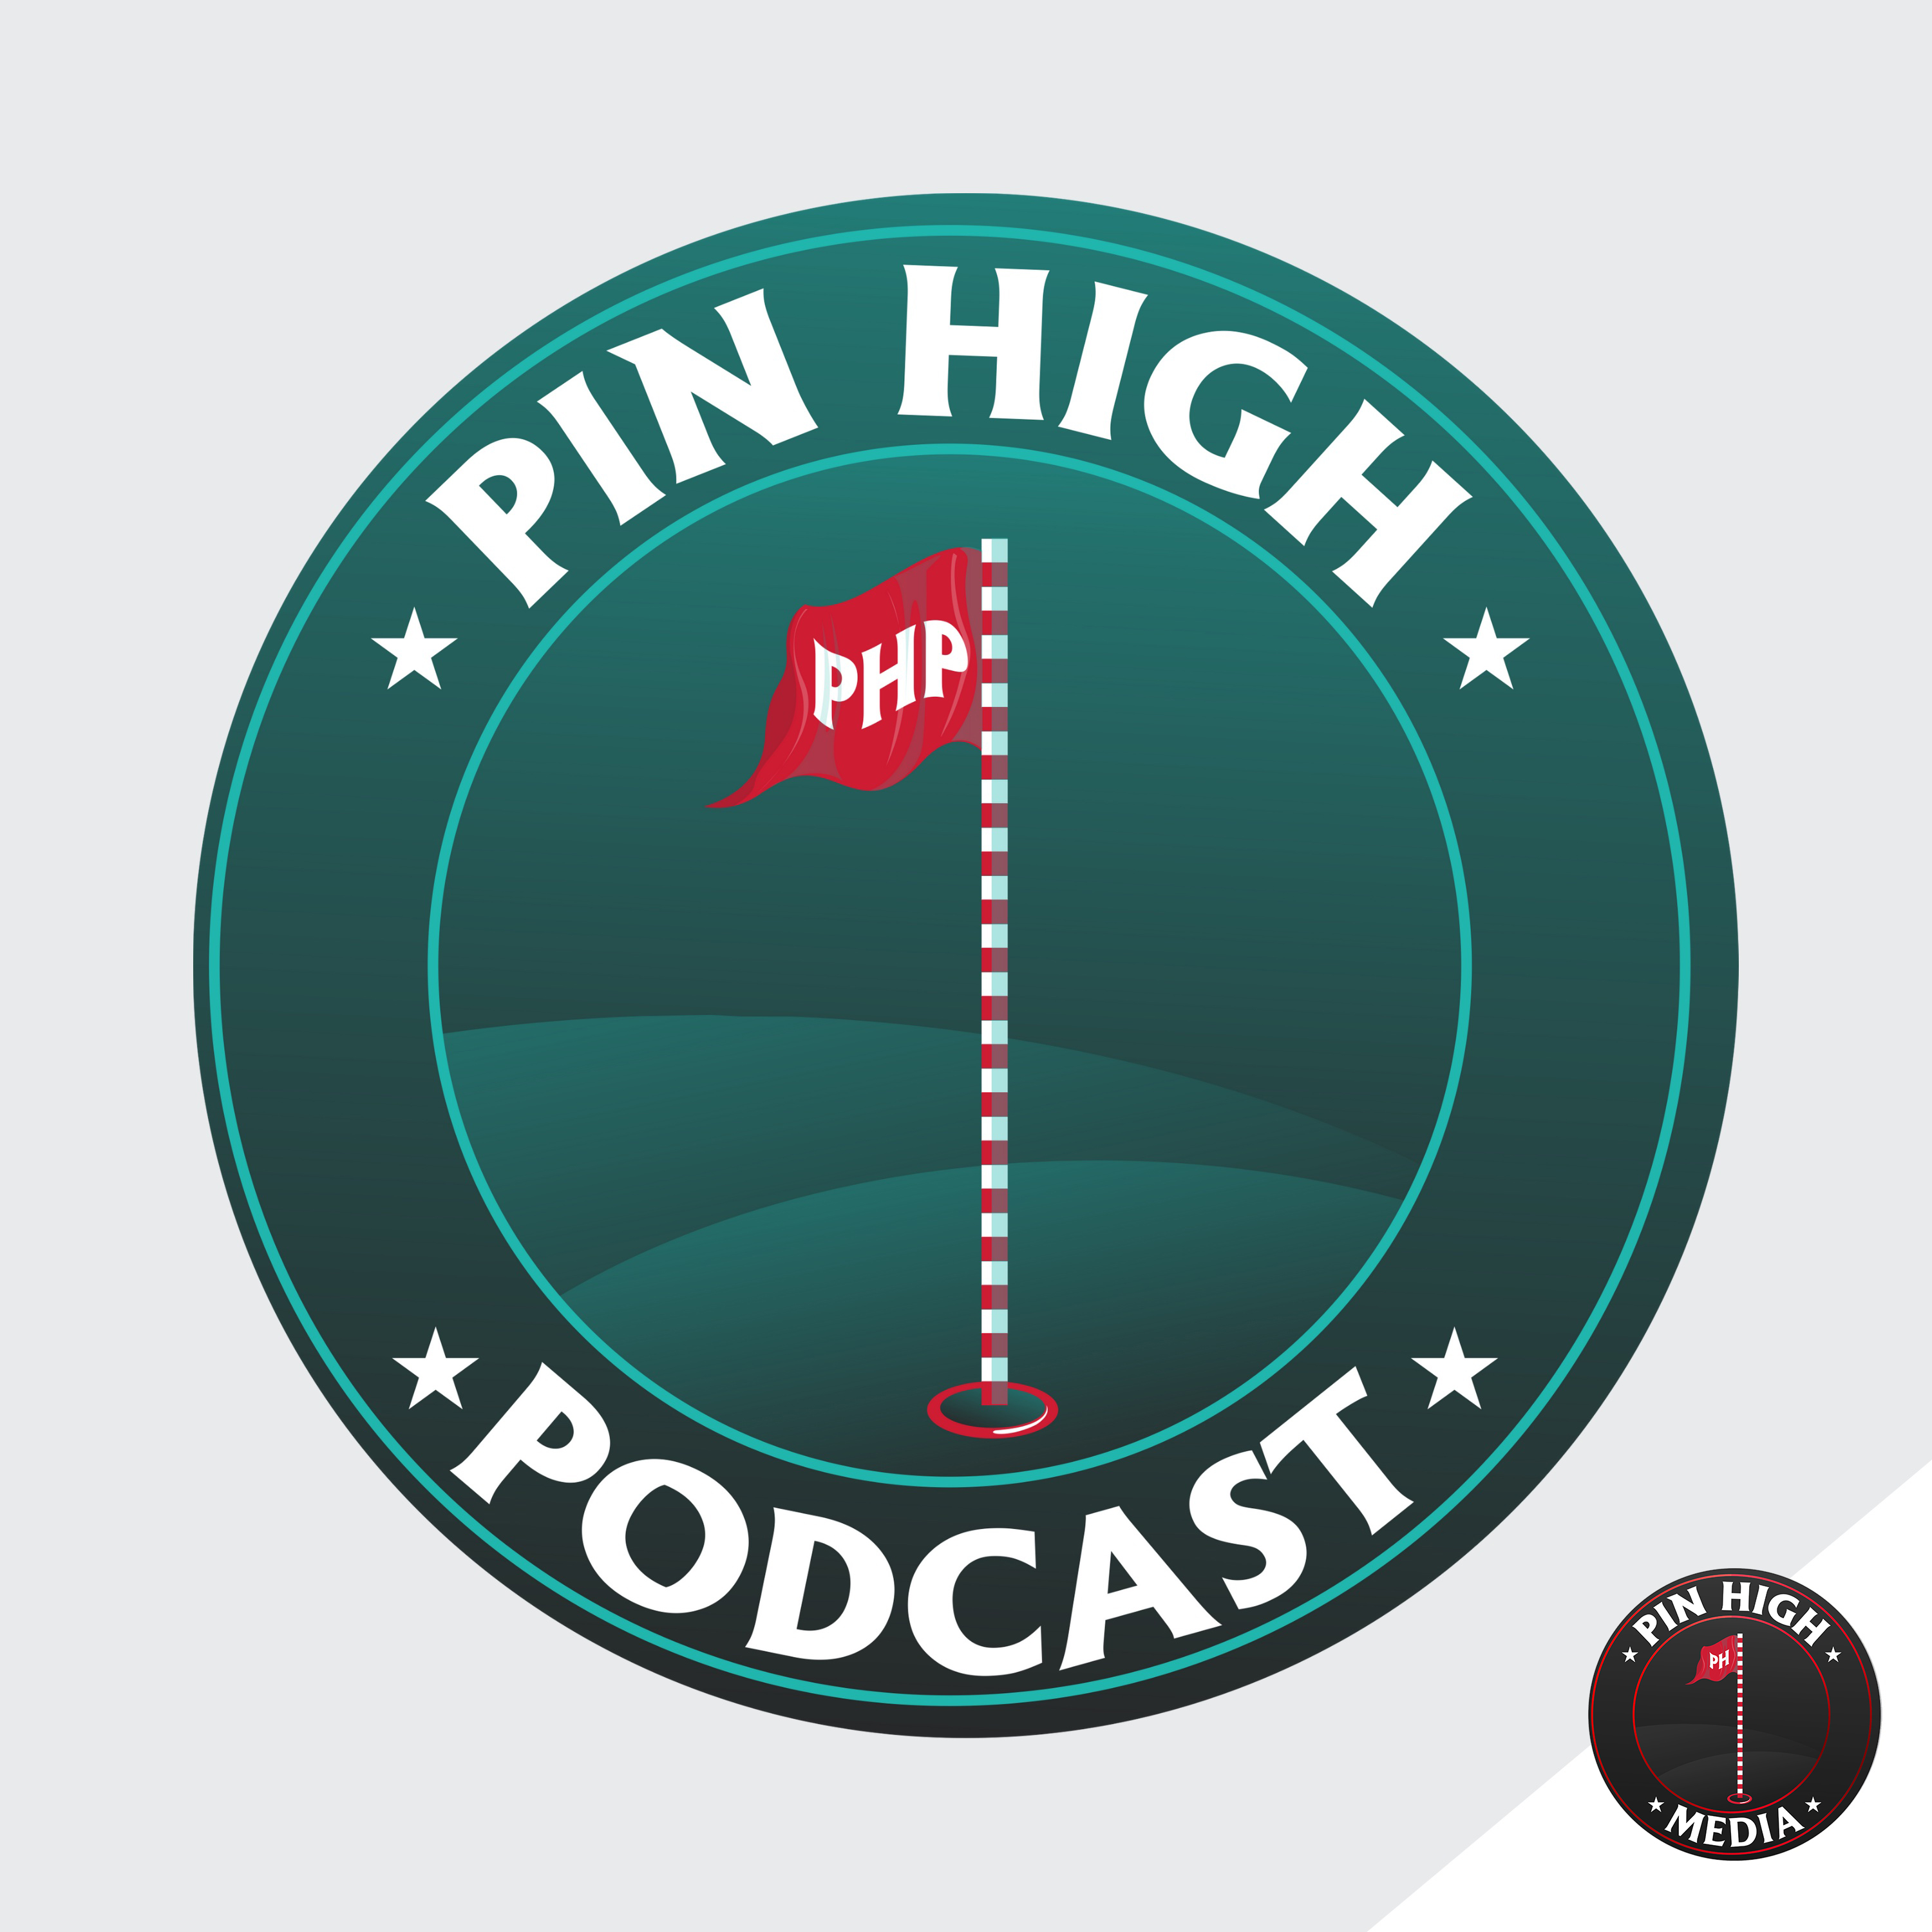 Pin High Podcast Ep. 187: Pin High Happy Hour: Round 1 Open Recap